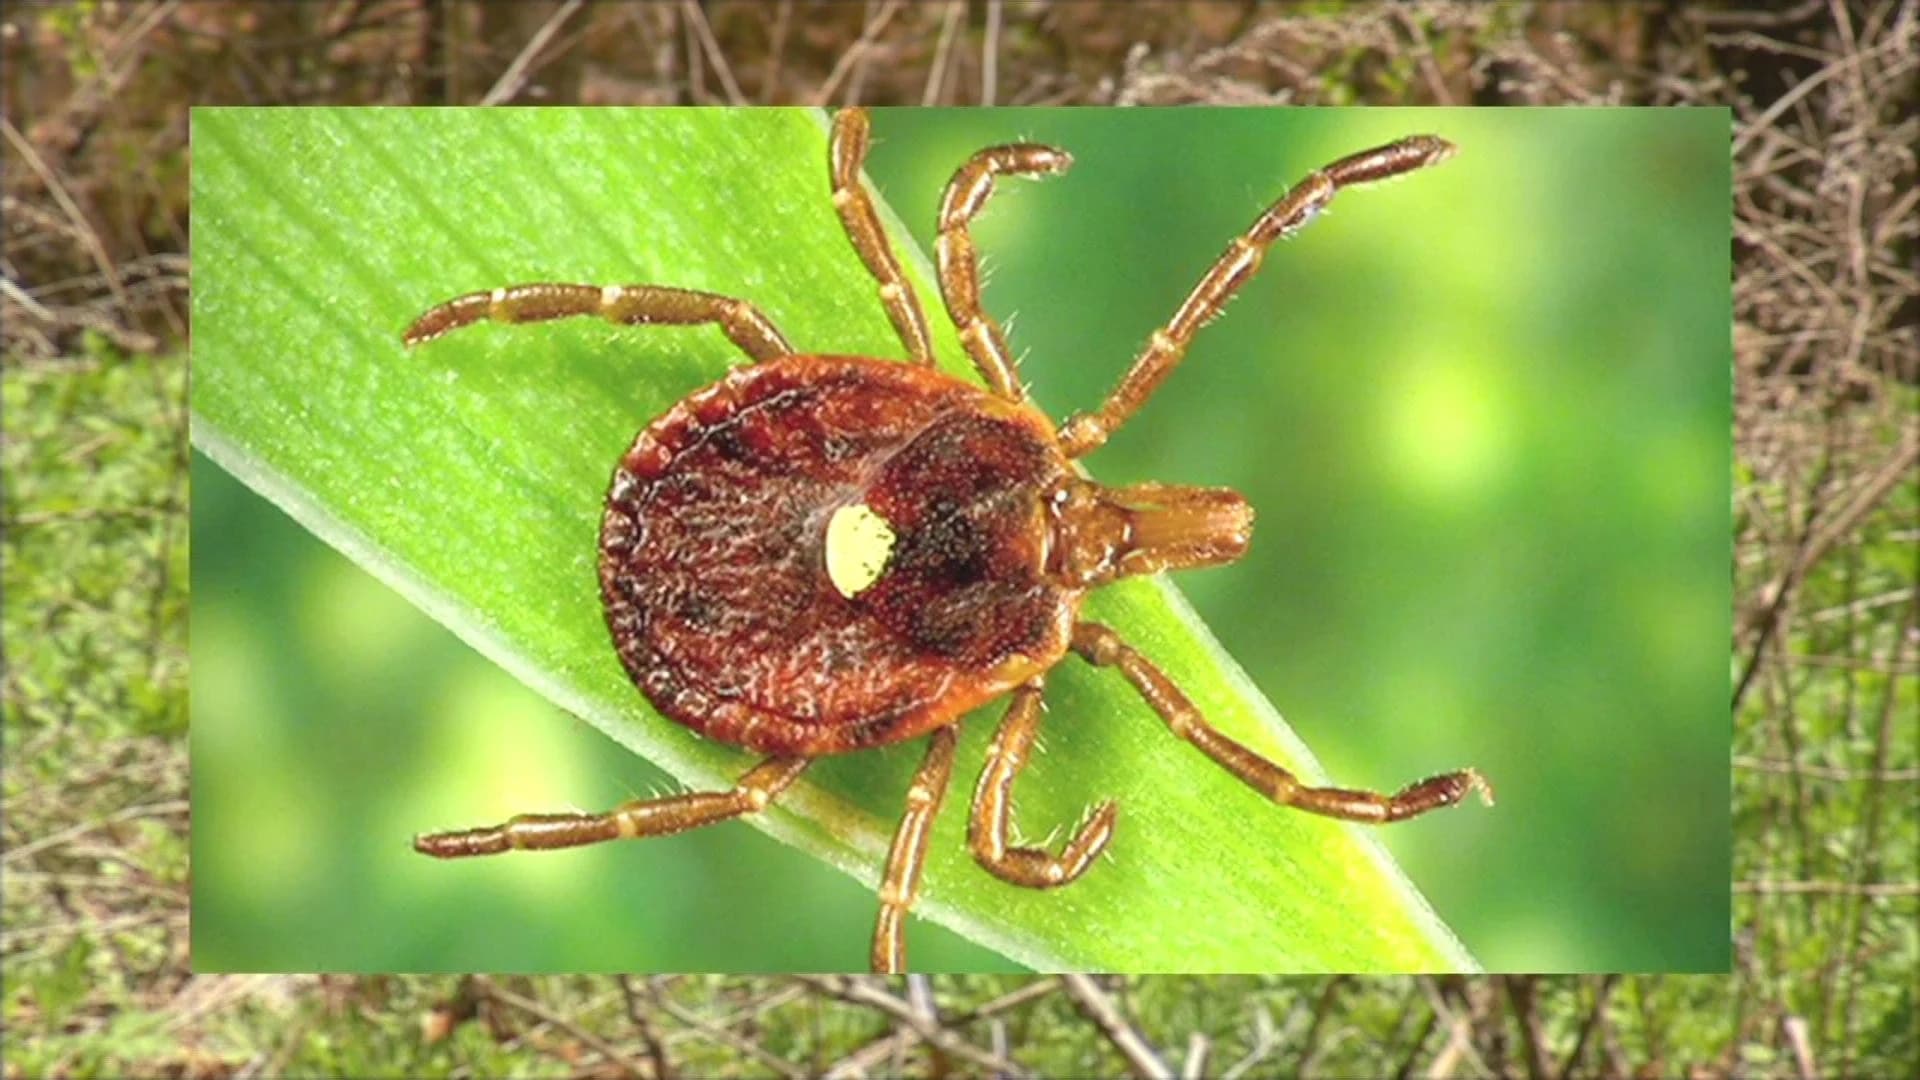 Doctors: Red meat allergies linked to East End tick bites